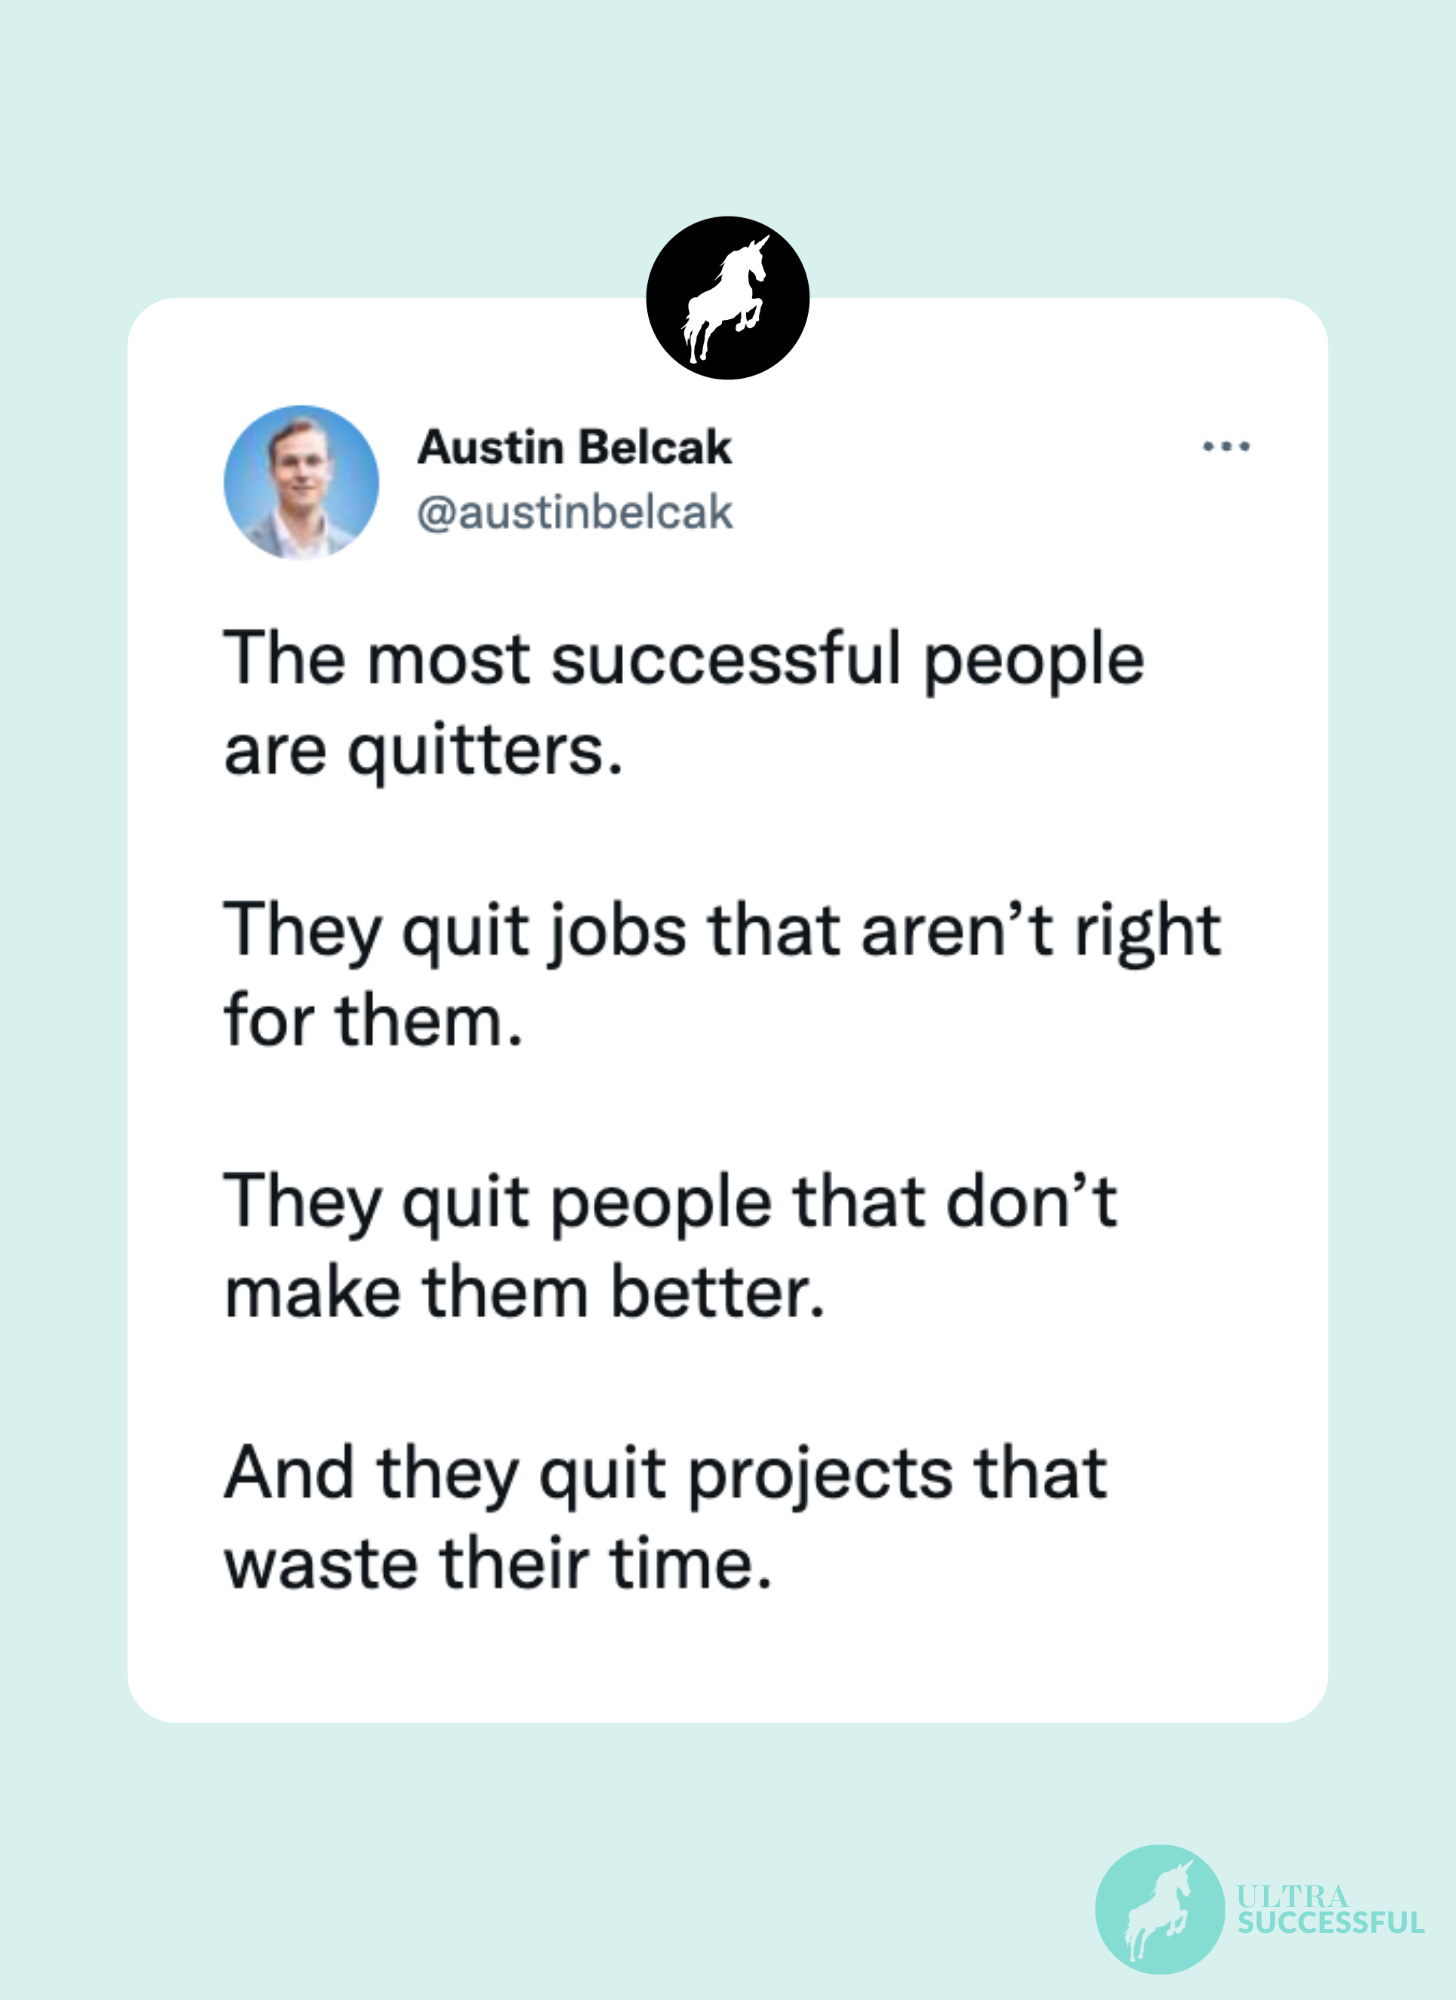 @austinbelcak: The most successful people are quitters.  They quit jobs that aren’t right for them.  They quit people that don’t make them better.  And they quit projects that waste their time.